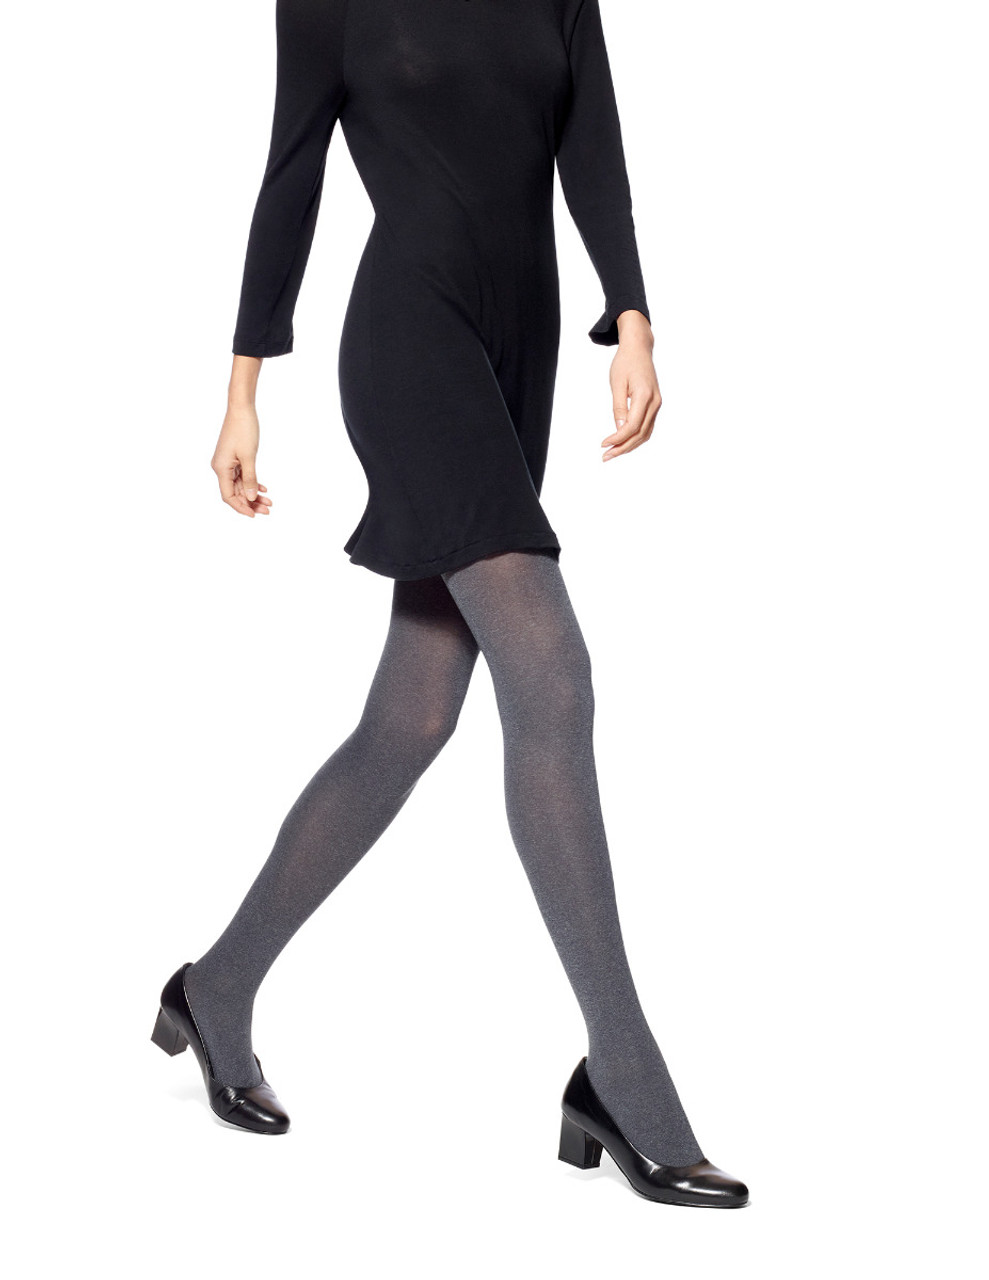 Super Opaque Tights with Smarttemp Technology